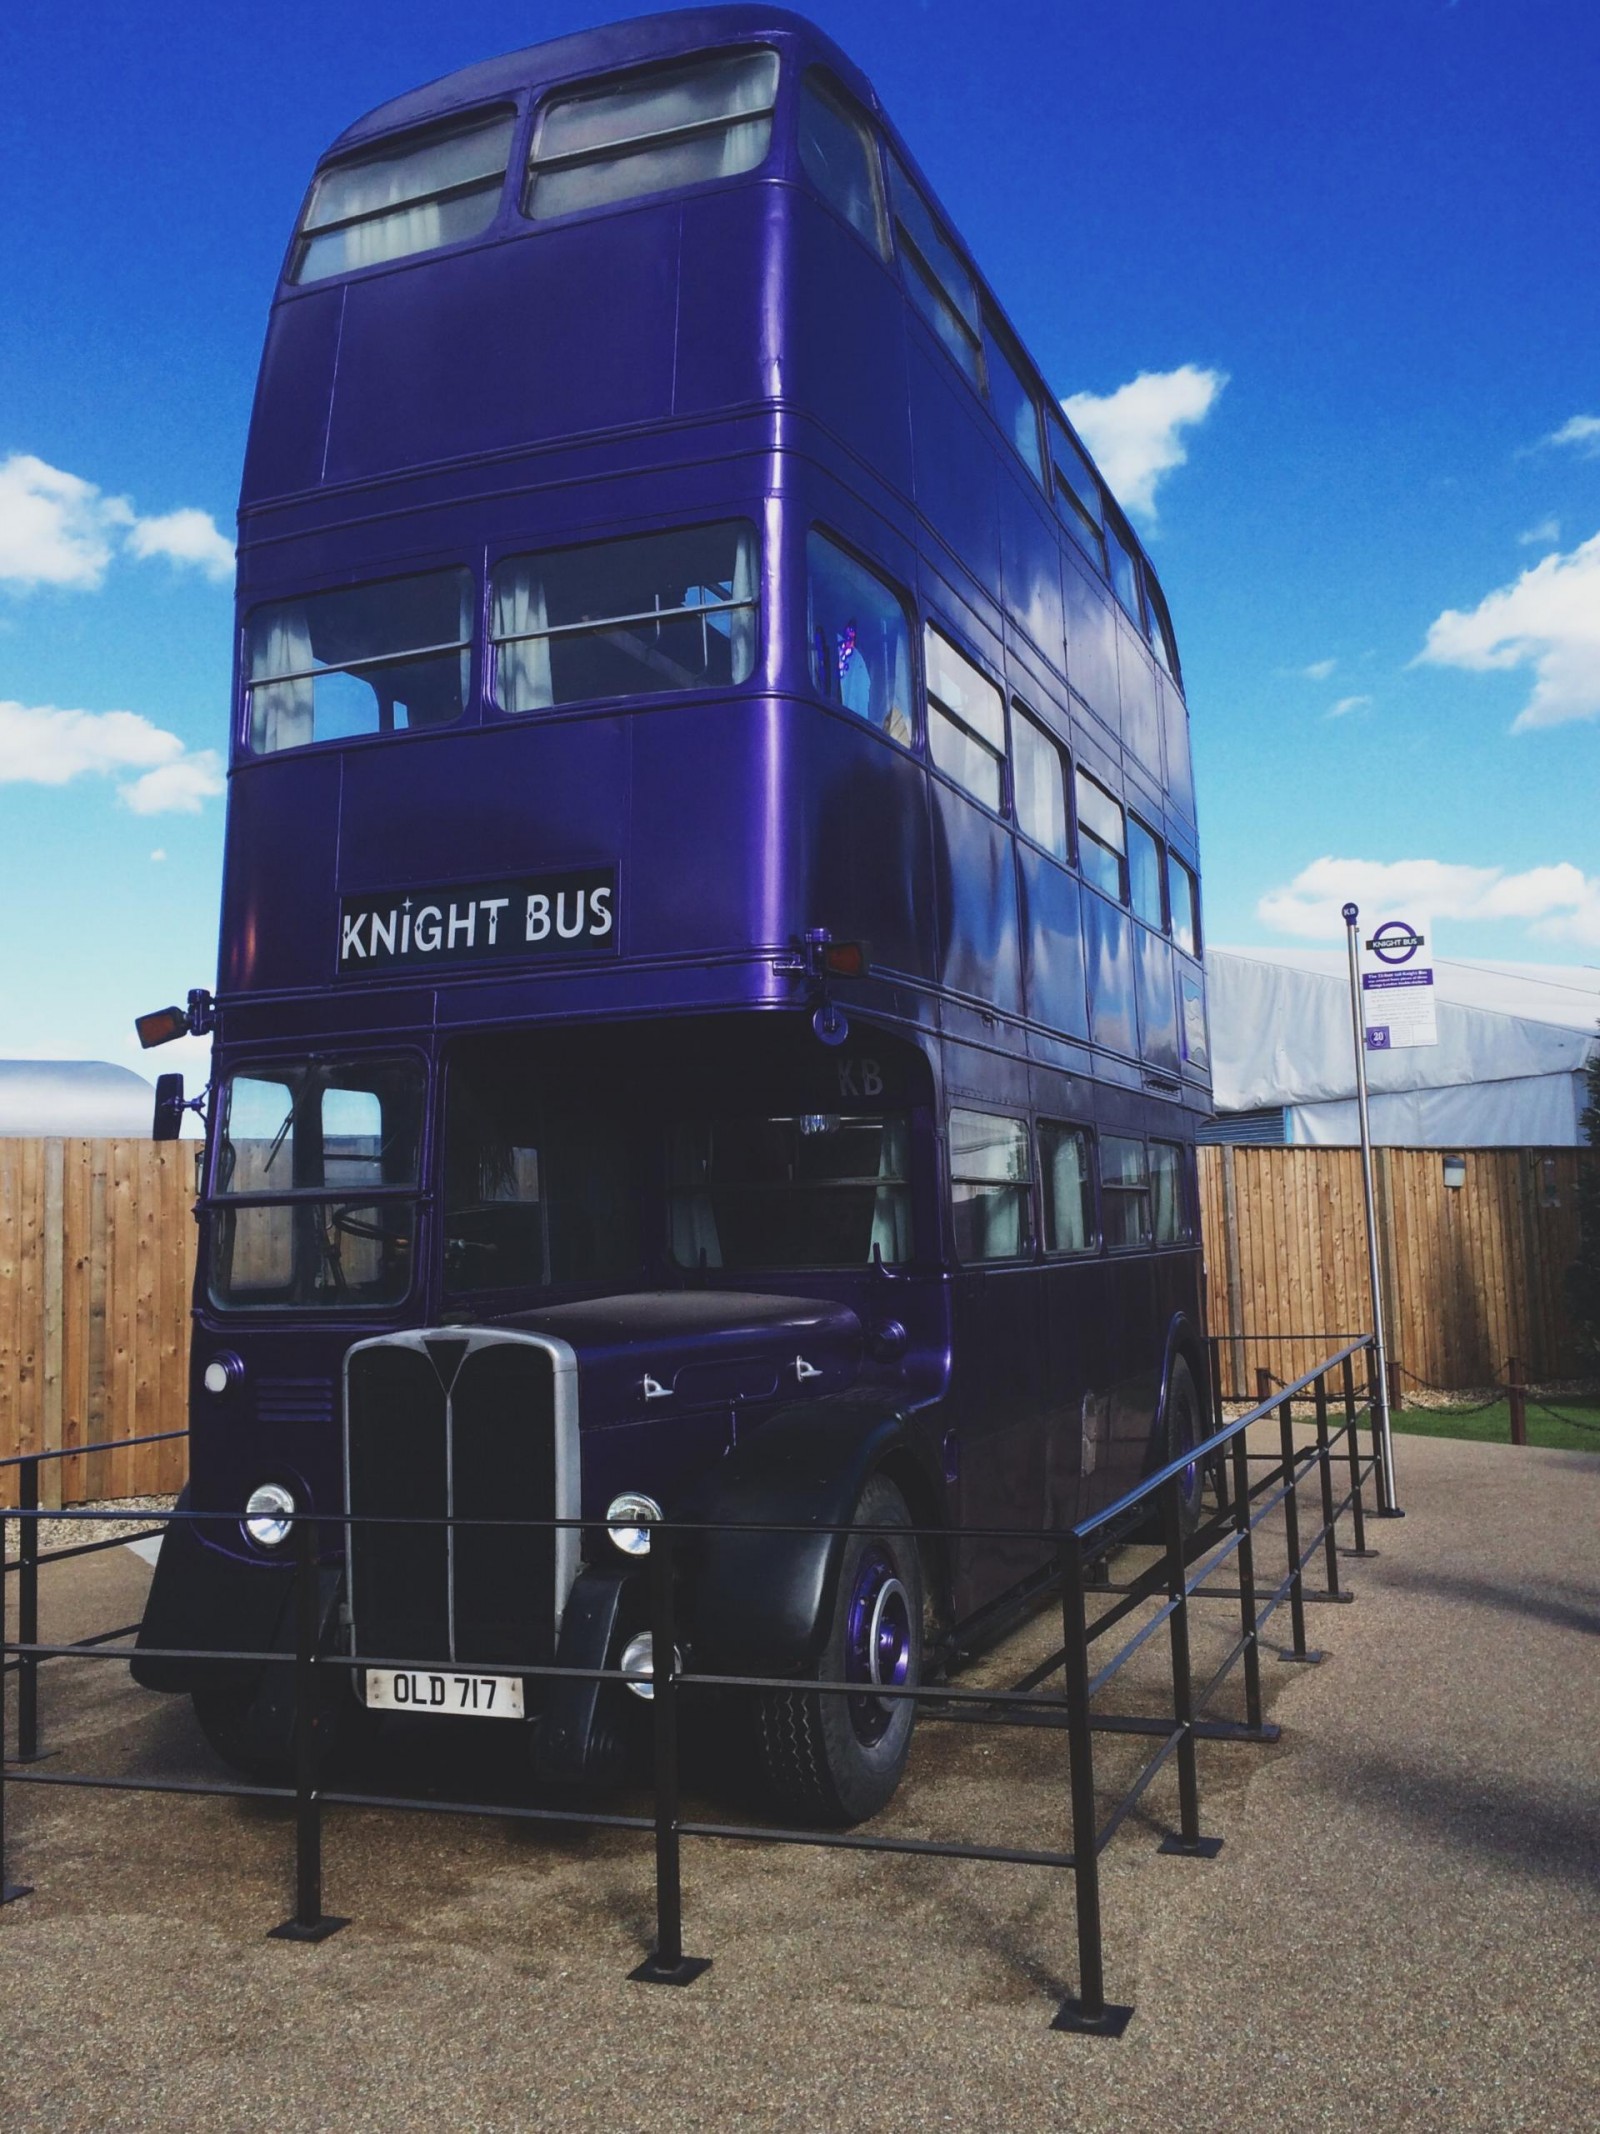 the knight bus